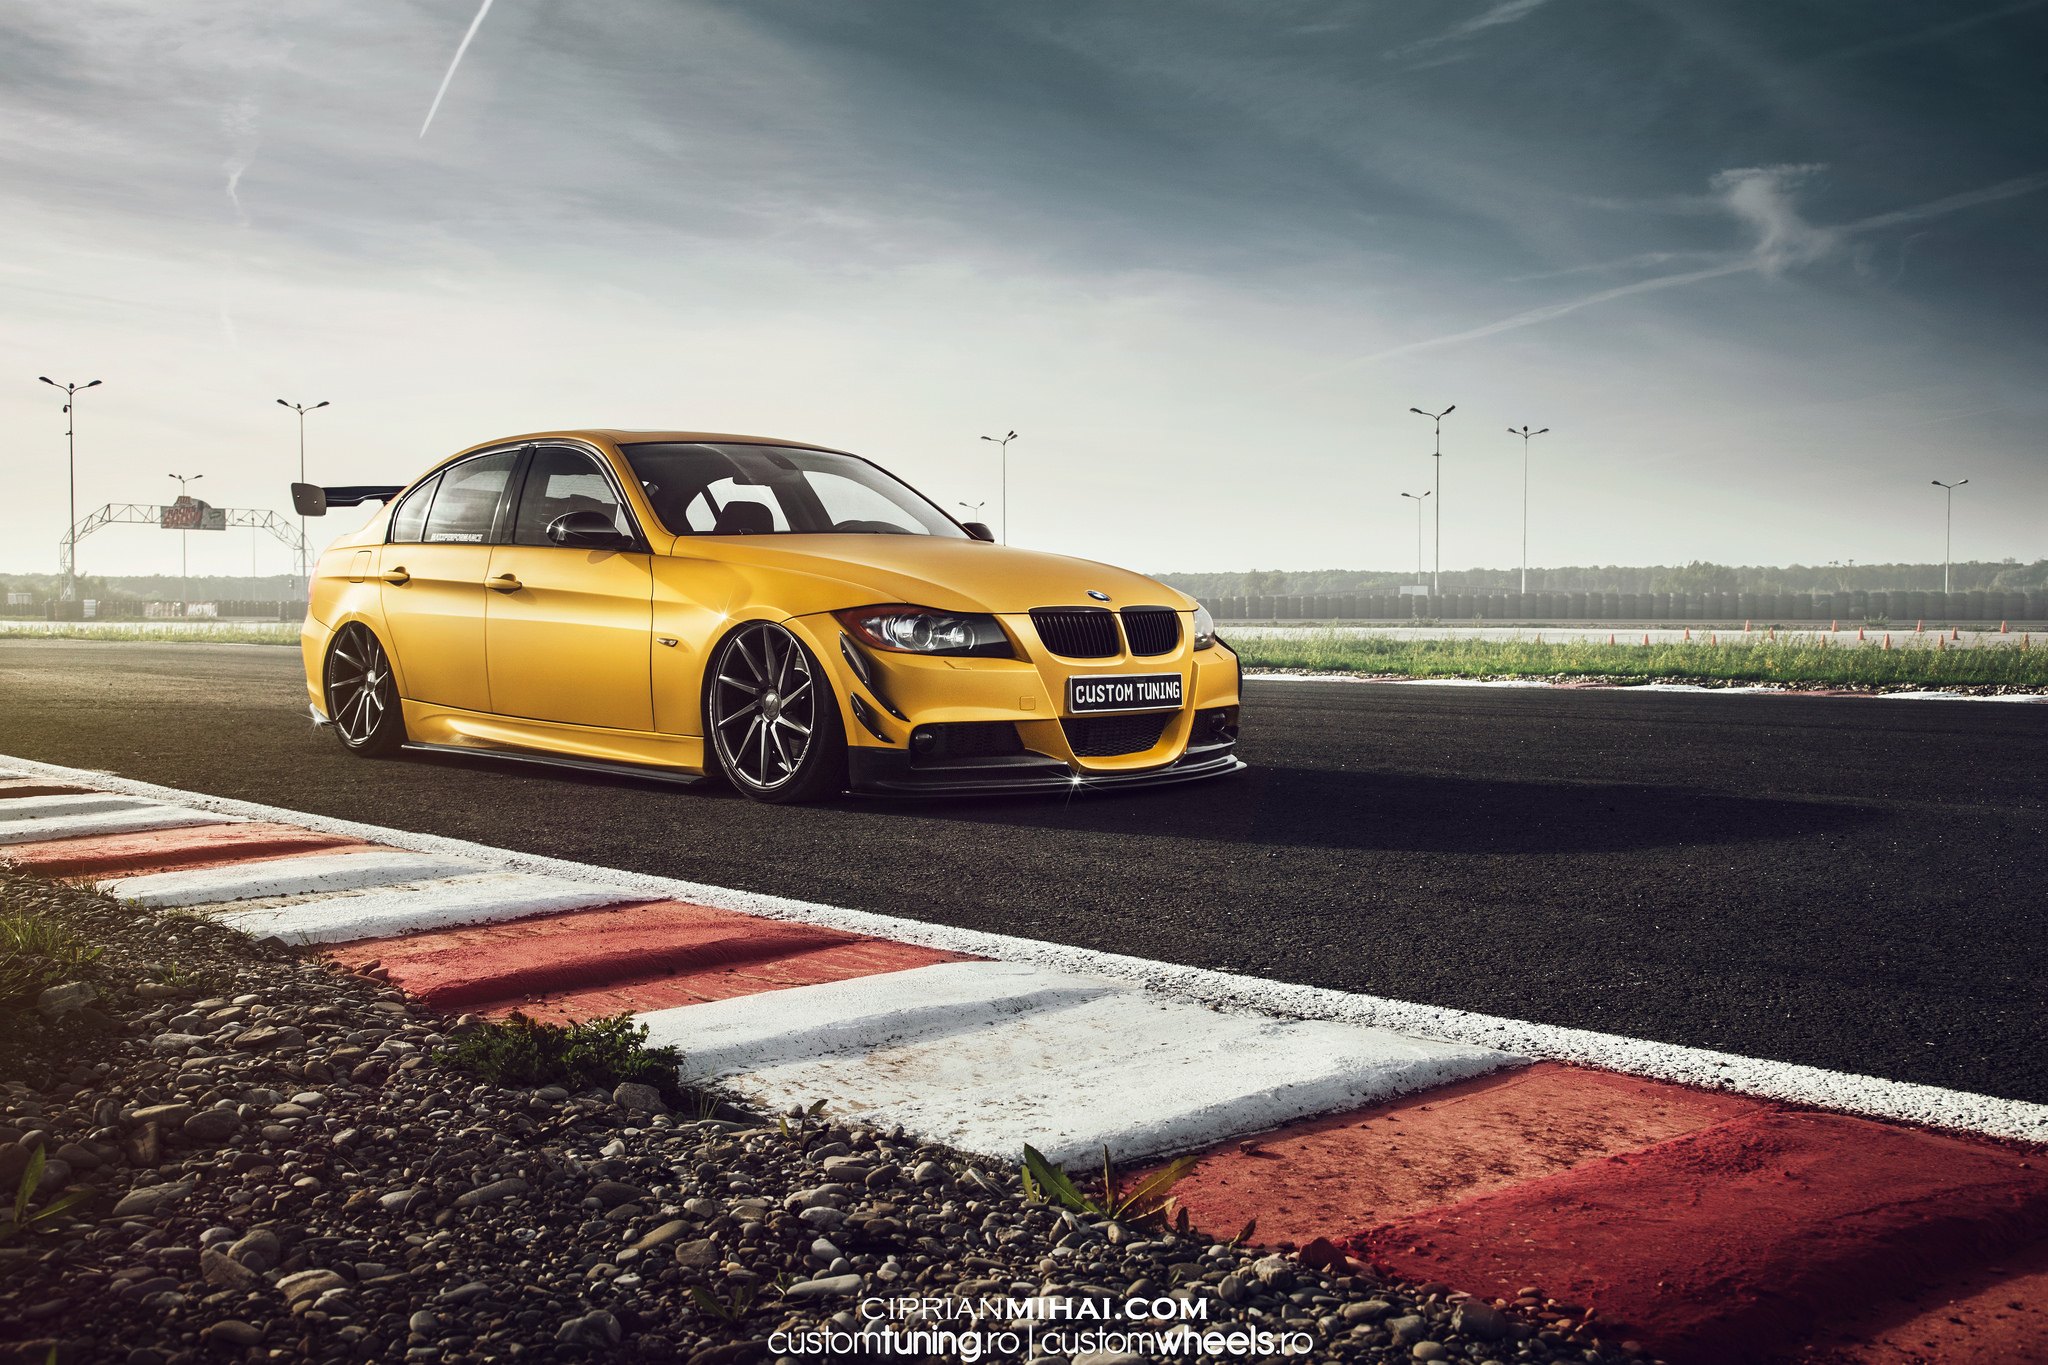 Carbon Fiber Side Skirts on Yellow BMW 3-Series - Photo by Ciprian Mihai